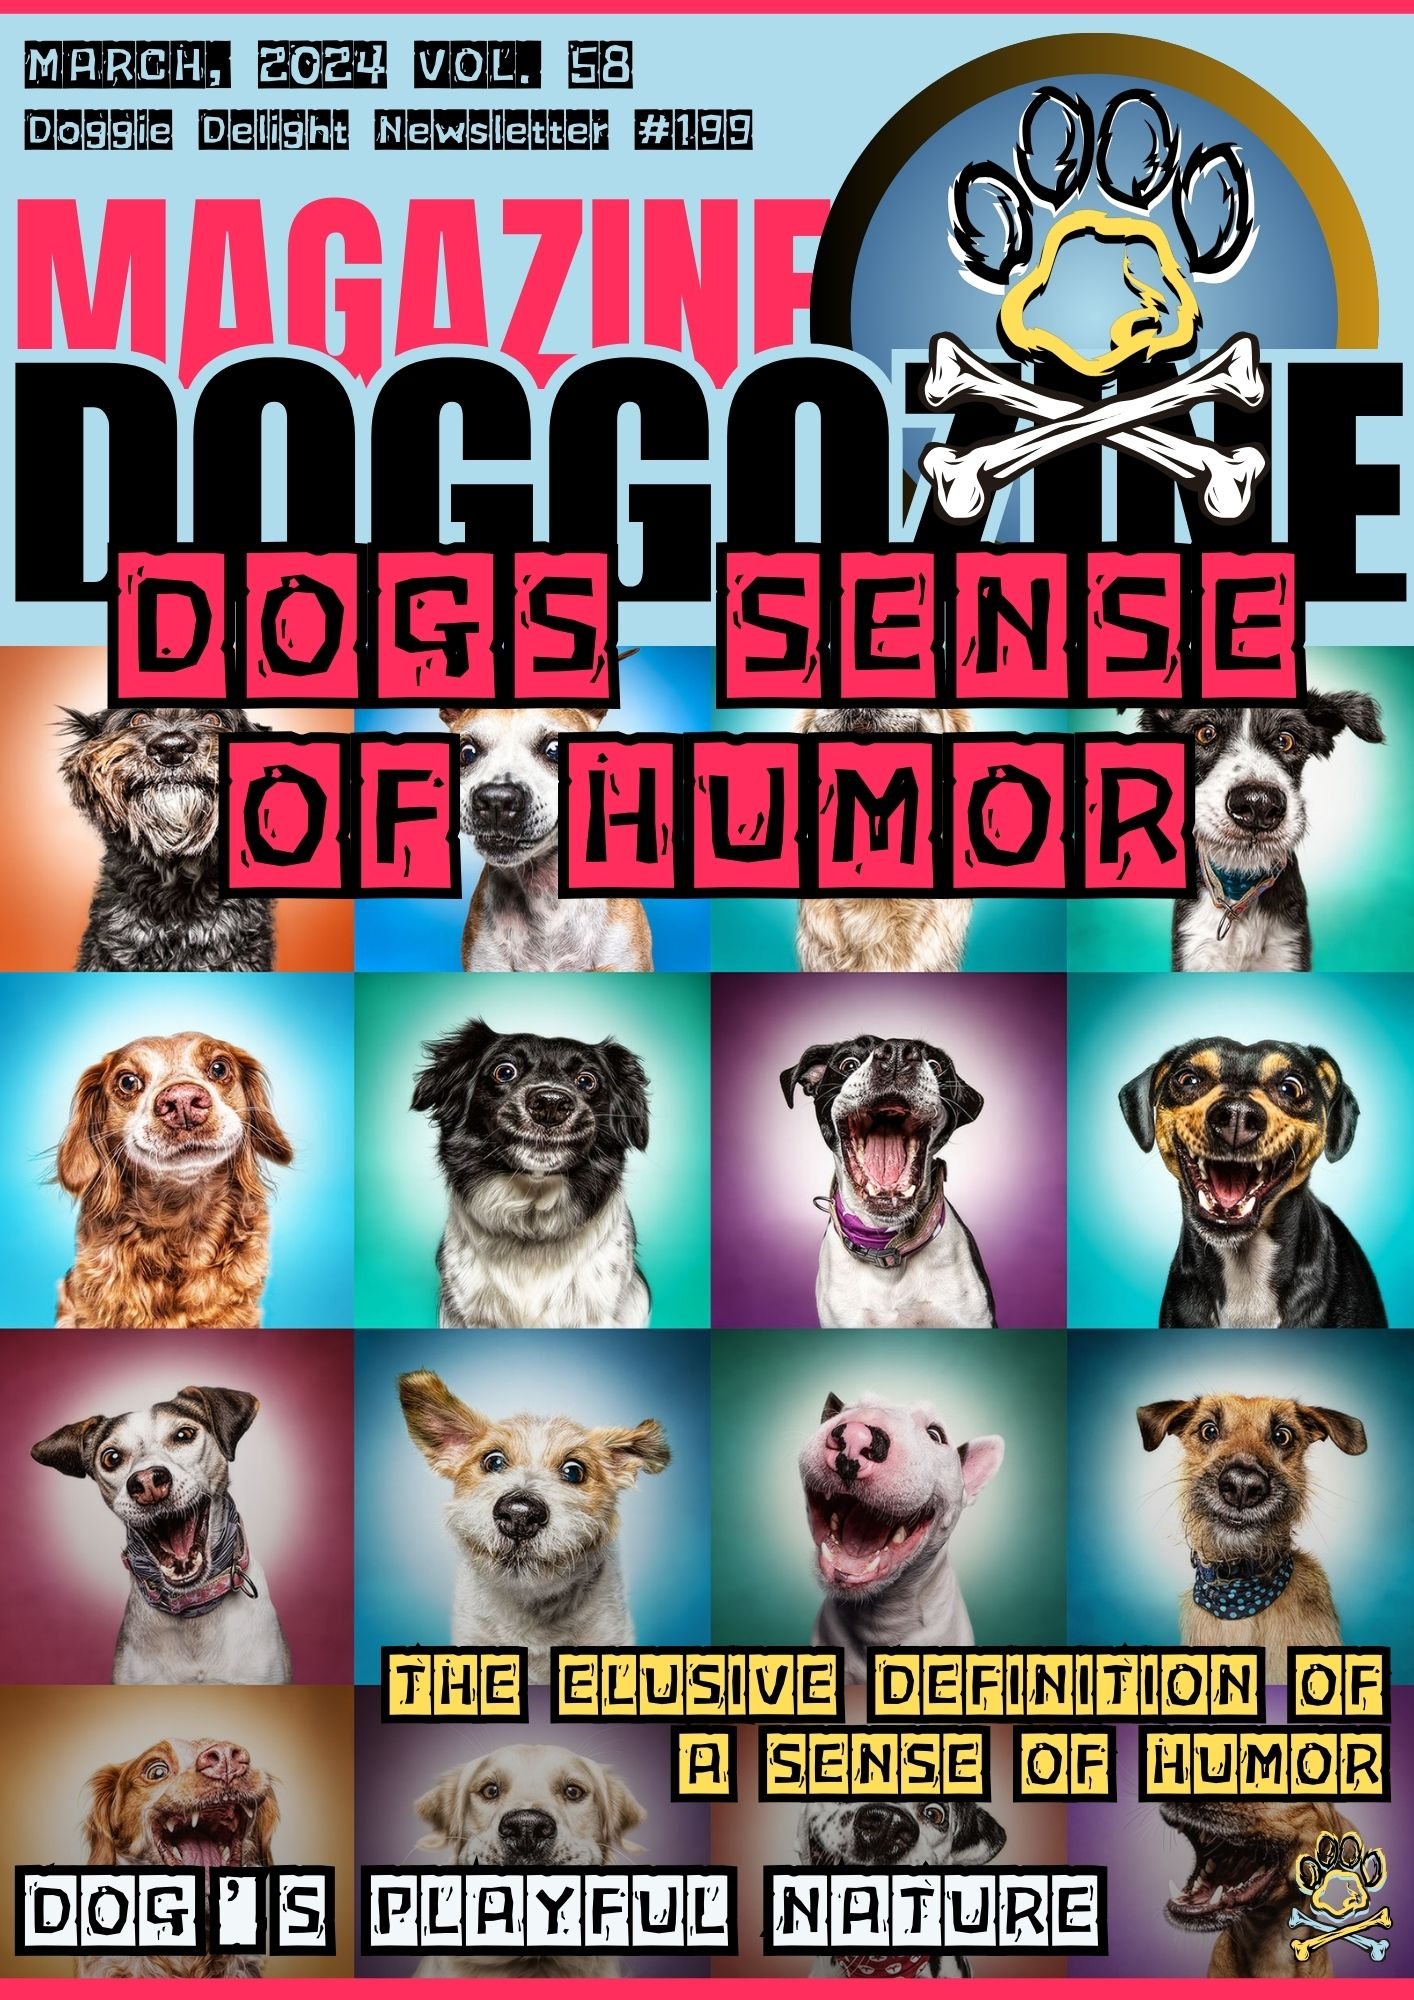 DO DOGS HAVE A SENSE OF HUMOR